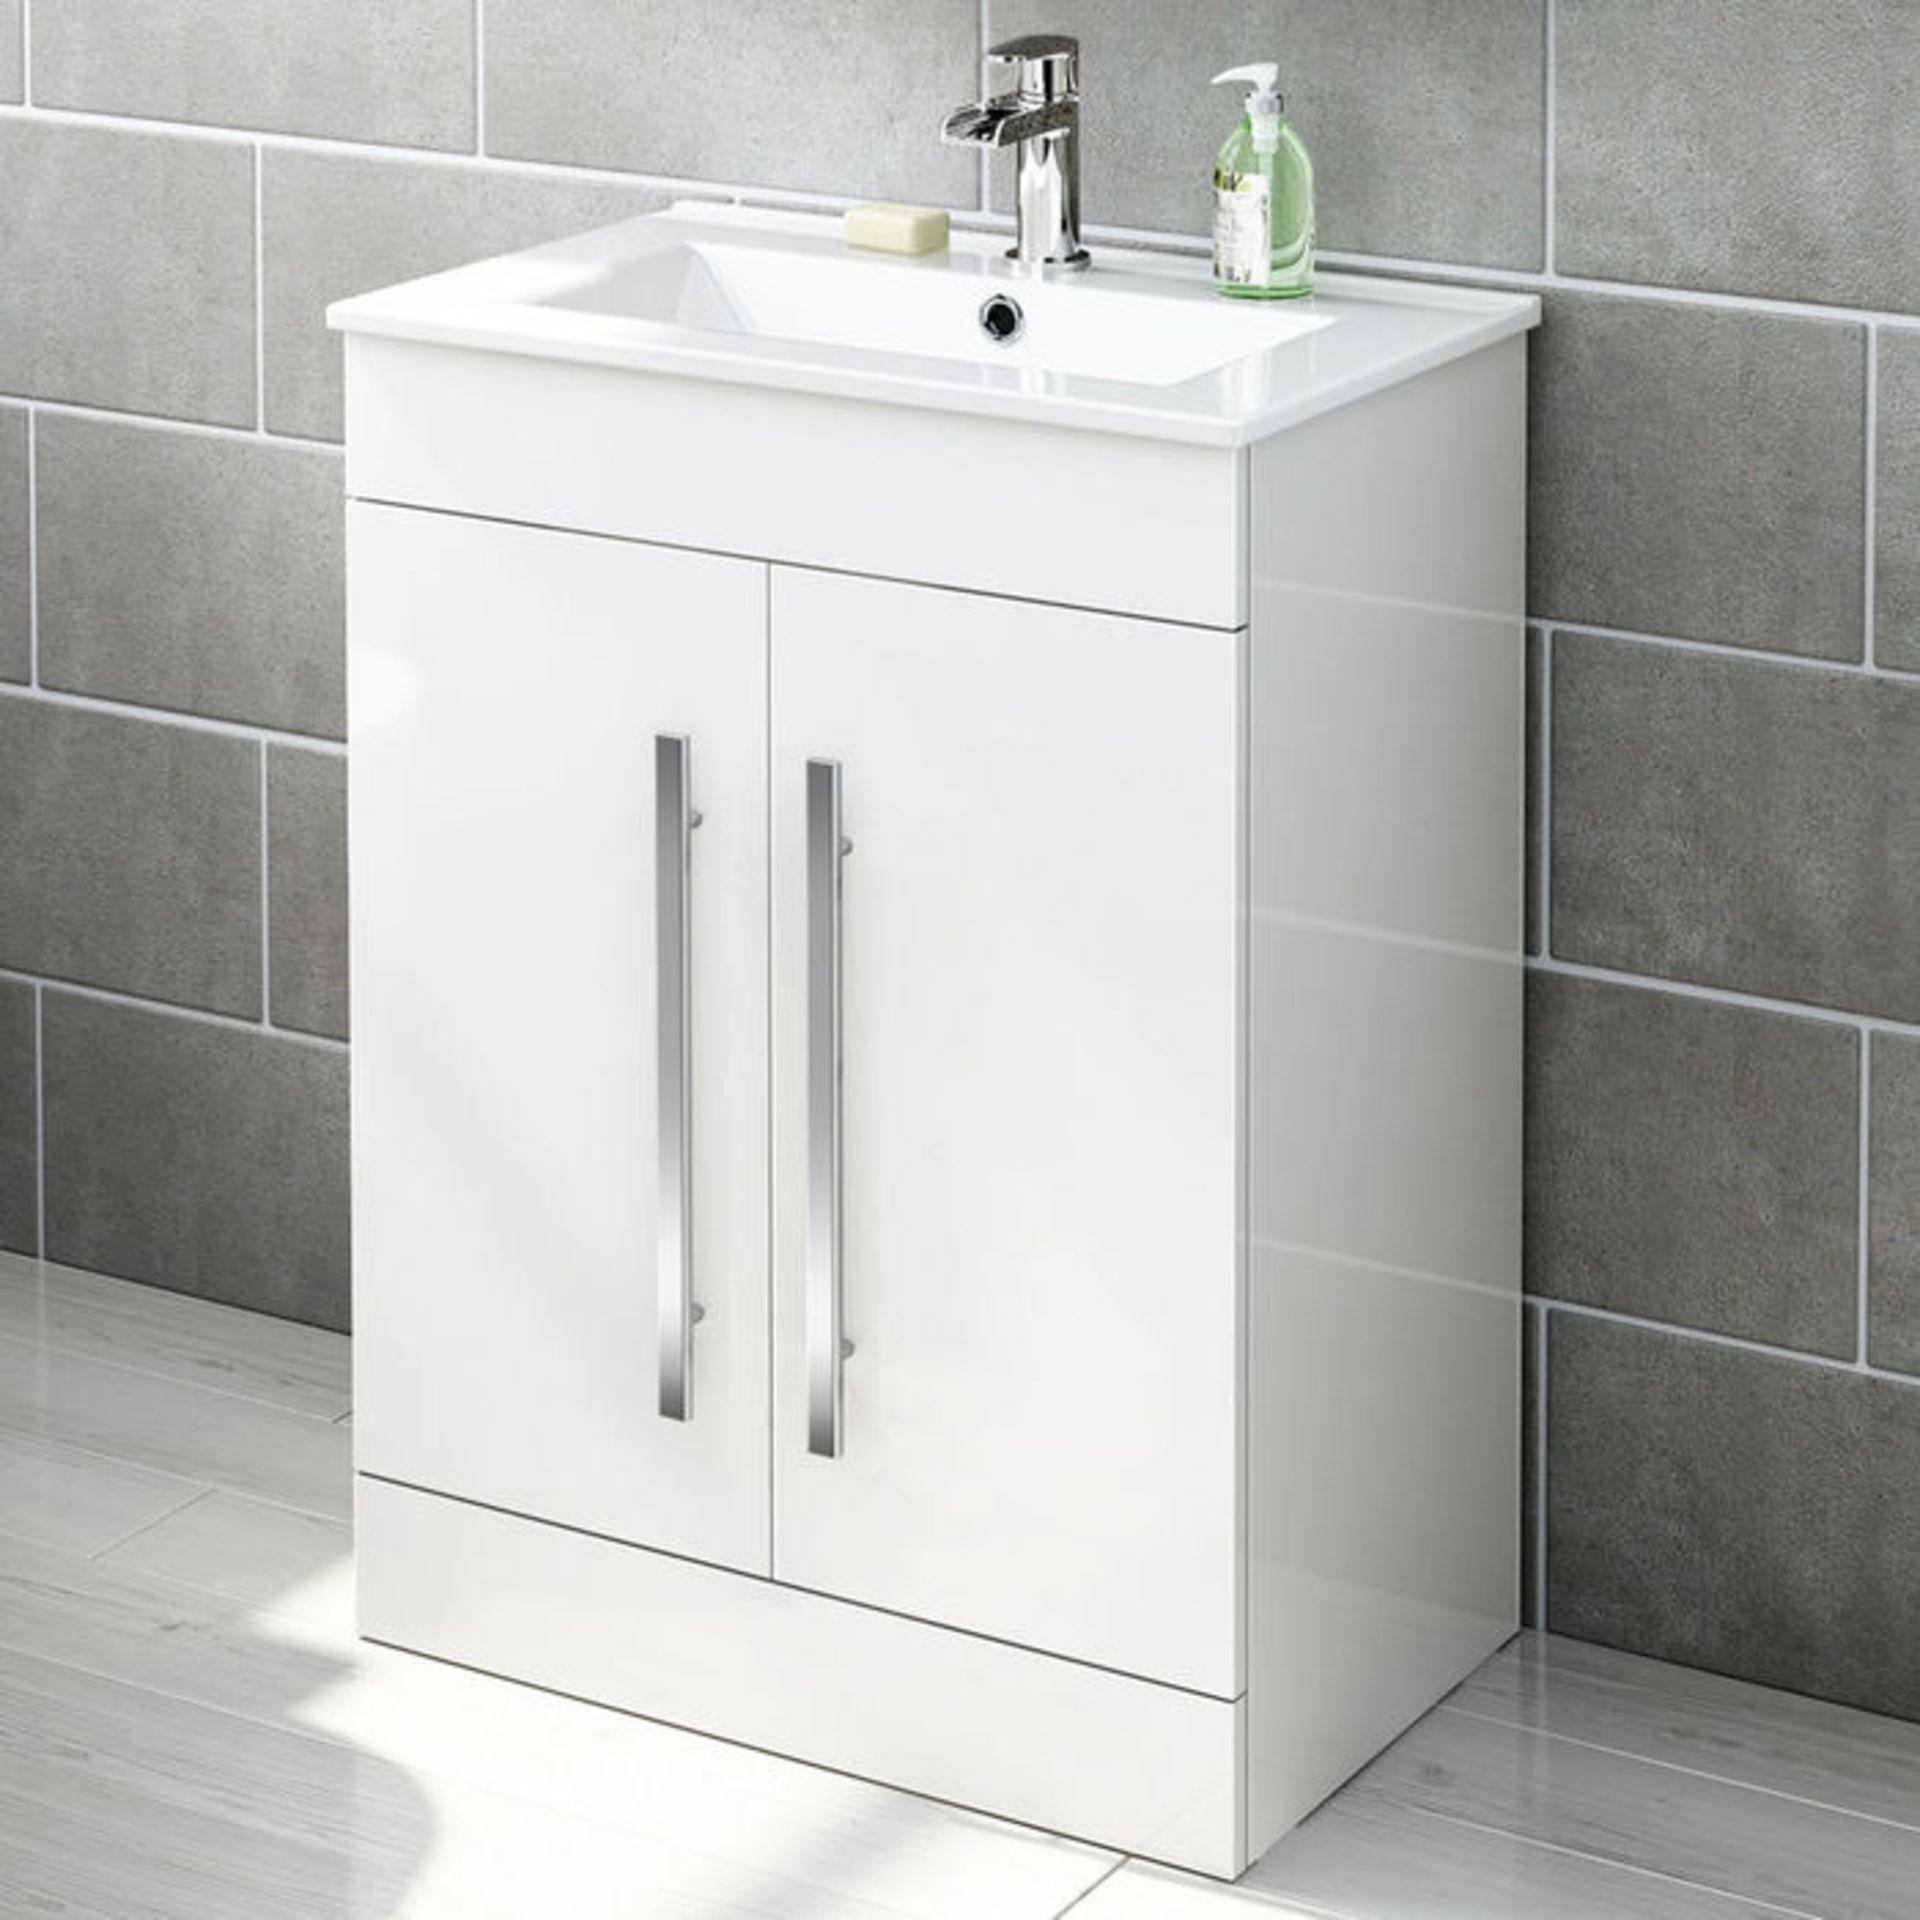 (GR52) 600mm Avon High Gloss White Basin Cabinet - Floor Standing RRP £499.99. Comes complete with